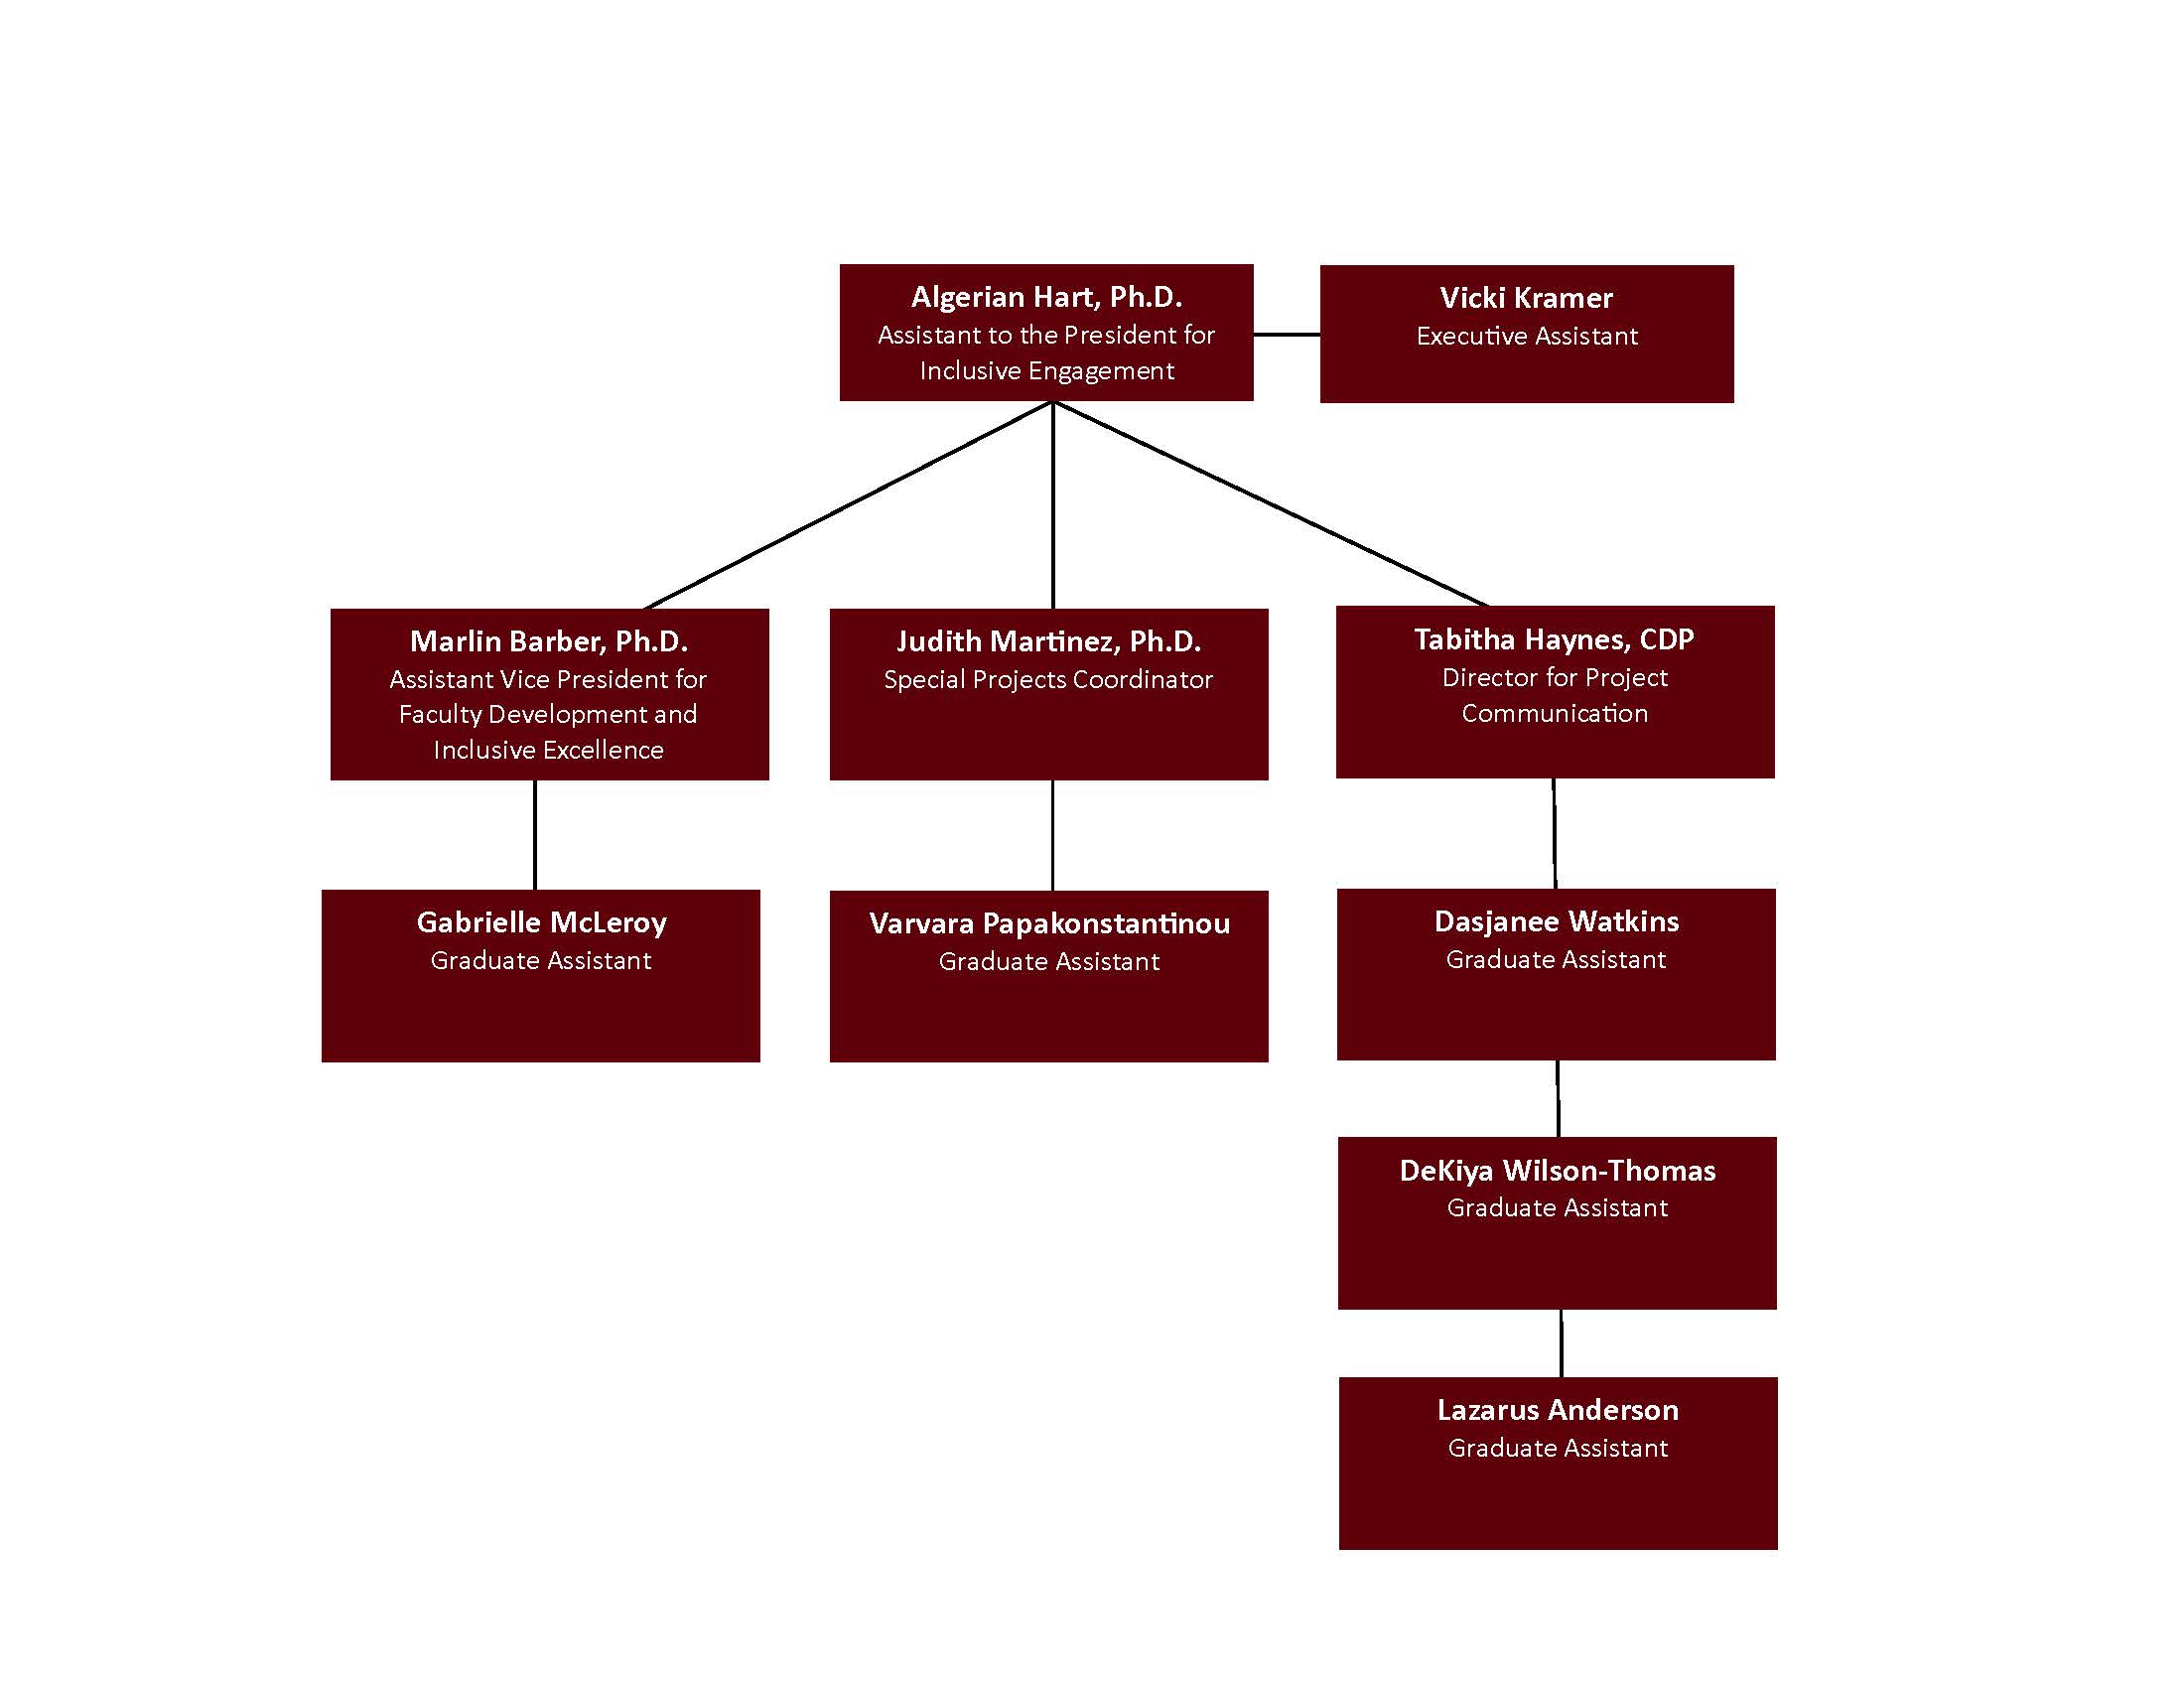 Office for Inclusive Engagement organizational chart